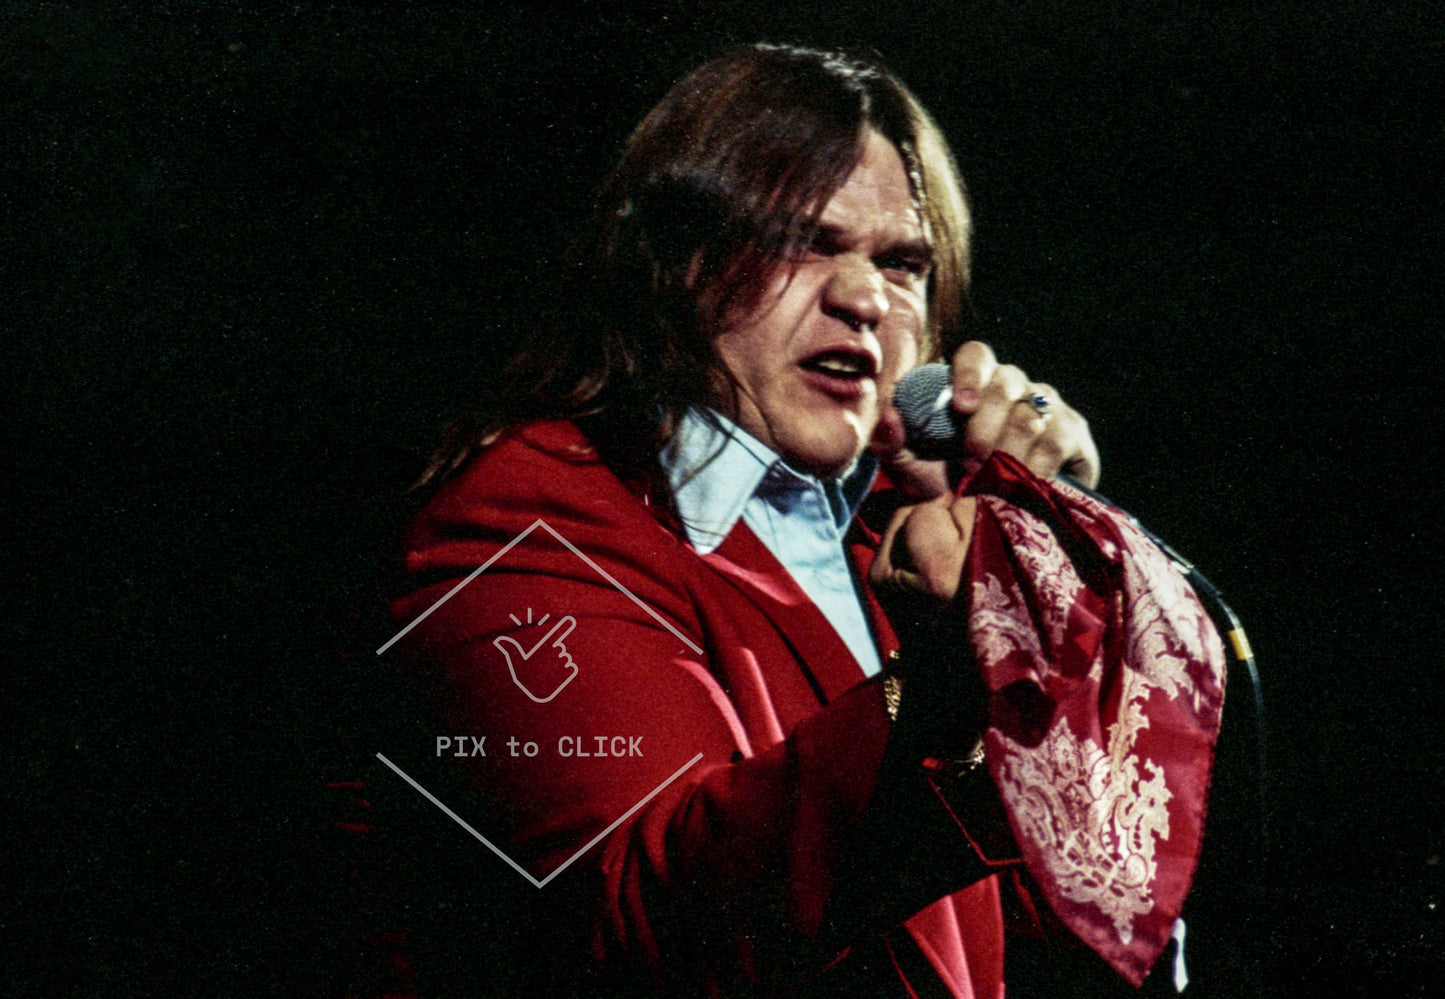 Meat Loaf performs at a benefit for Indochinese refugees - The Palladium - New York City - February 16, 1979